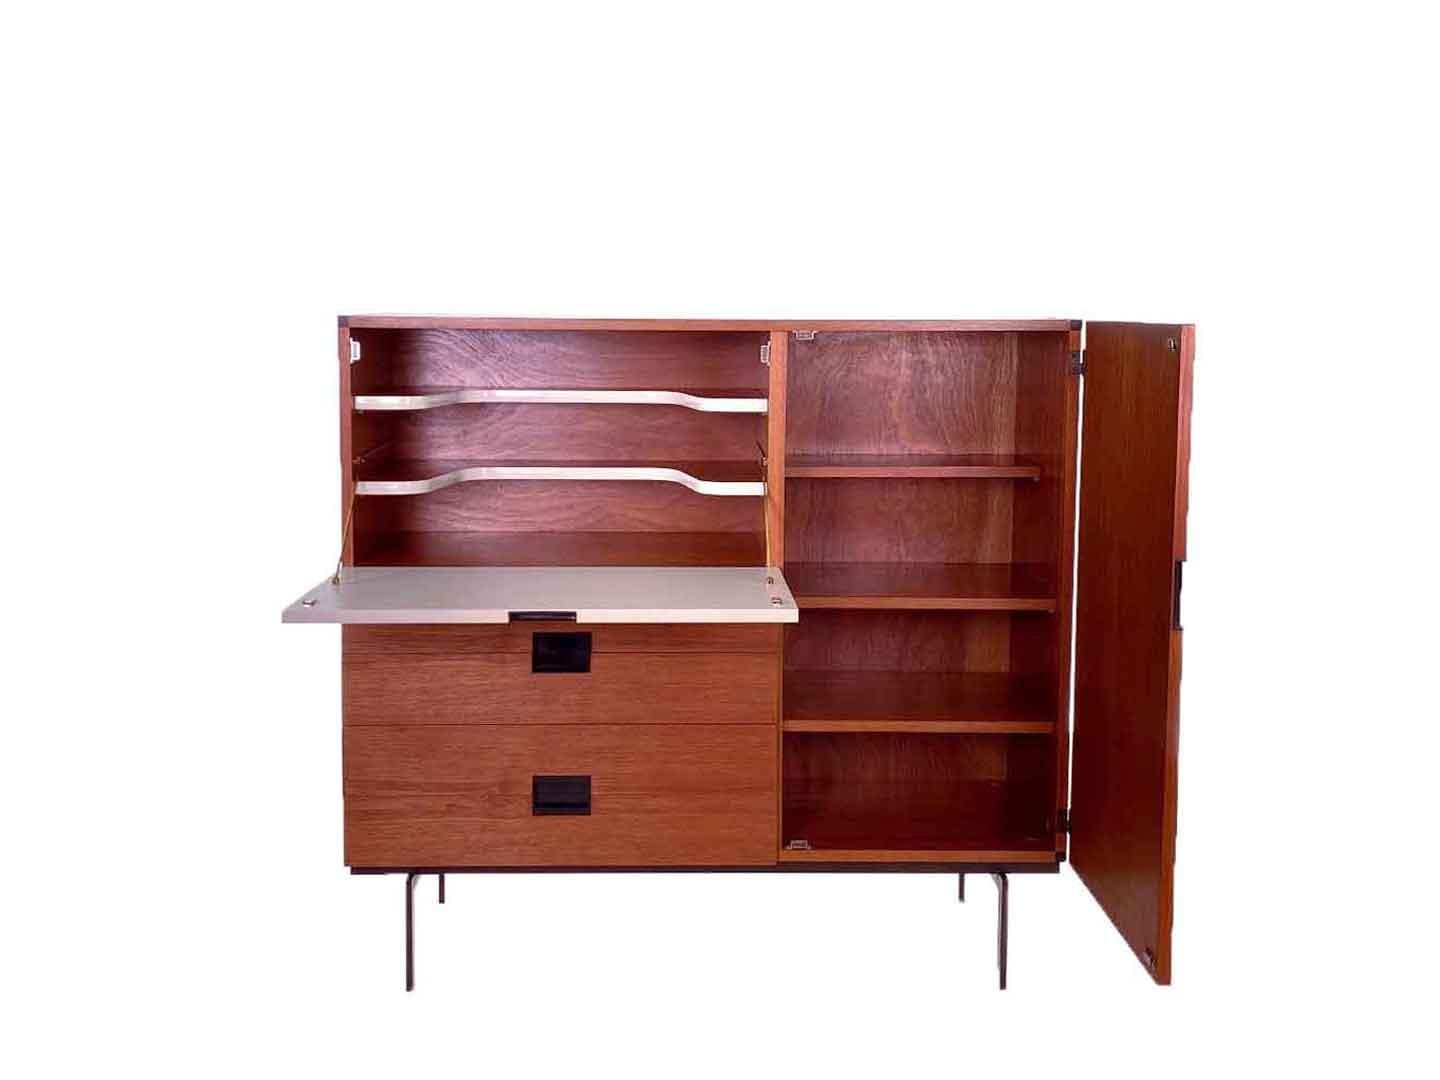 Very particularly iconic vintage CU01 cabinet by Cees Braakman, produced by Pastoe in 1958. The cabinet belongs to the Japanese series of Pastoe and is a real Dutch design classic. The cabinet has four drawers, a door, a valve and multiple shelves.